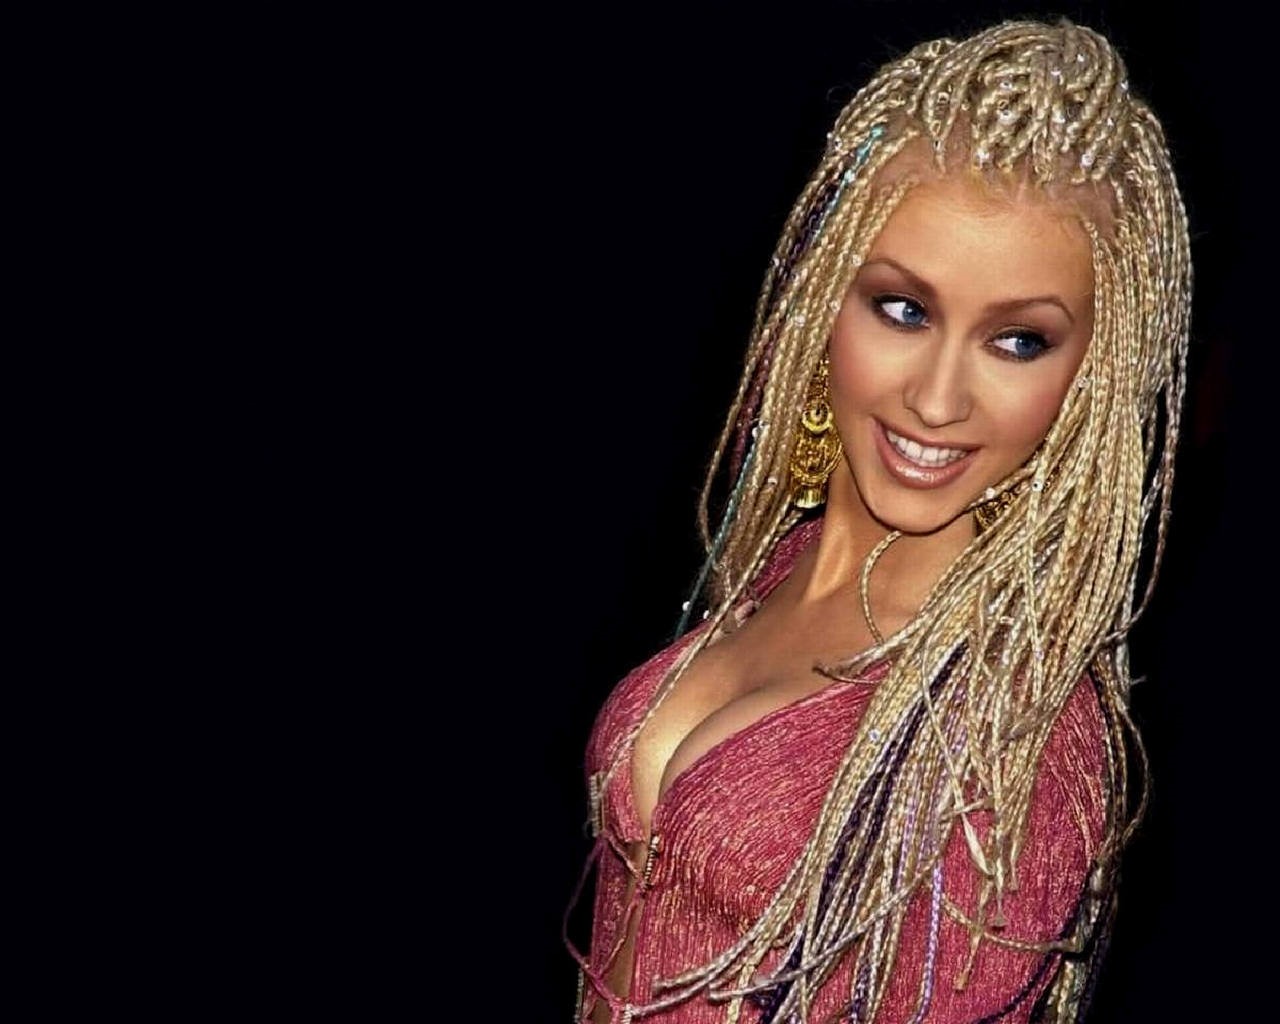 Cristina Aguilera Blond Hair Is Grad Wallpapers Party Pics